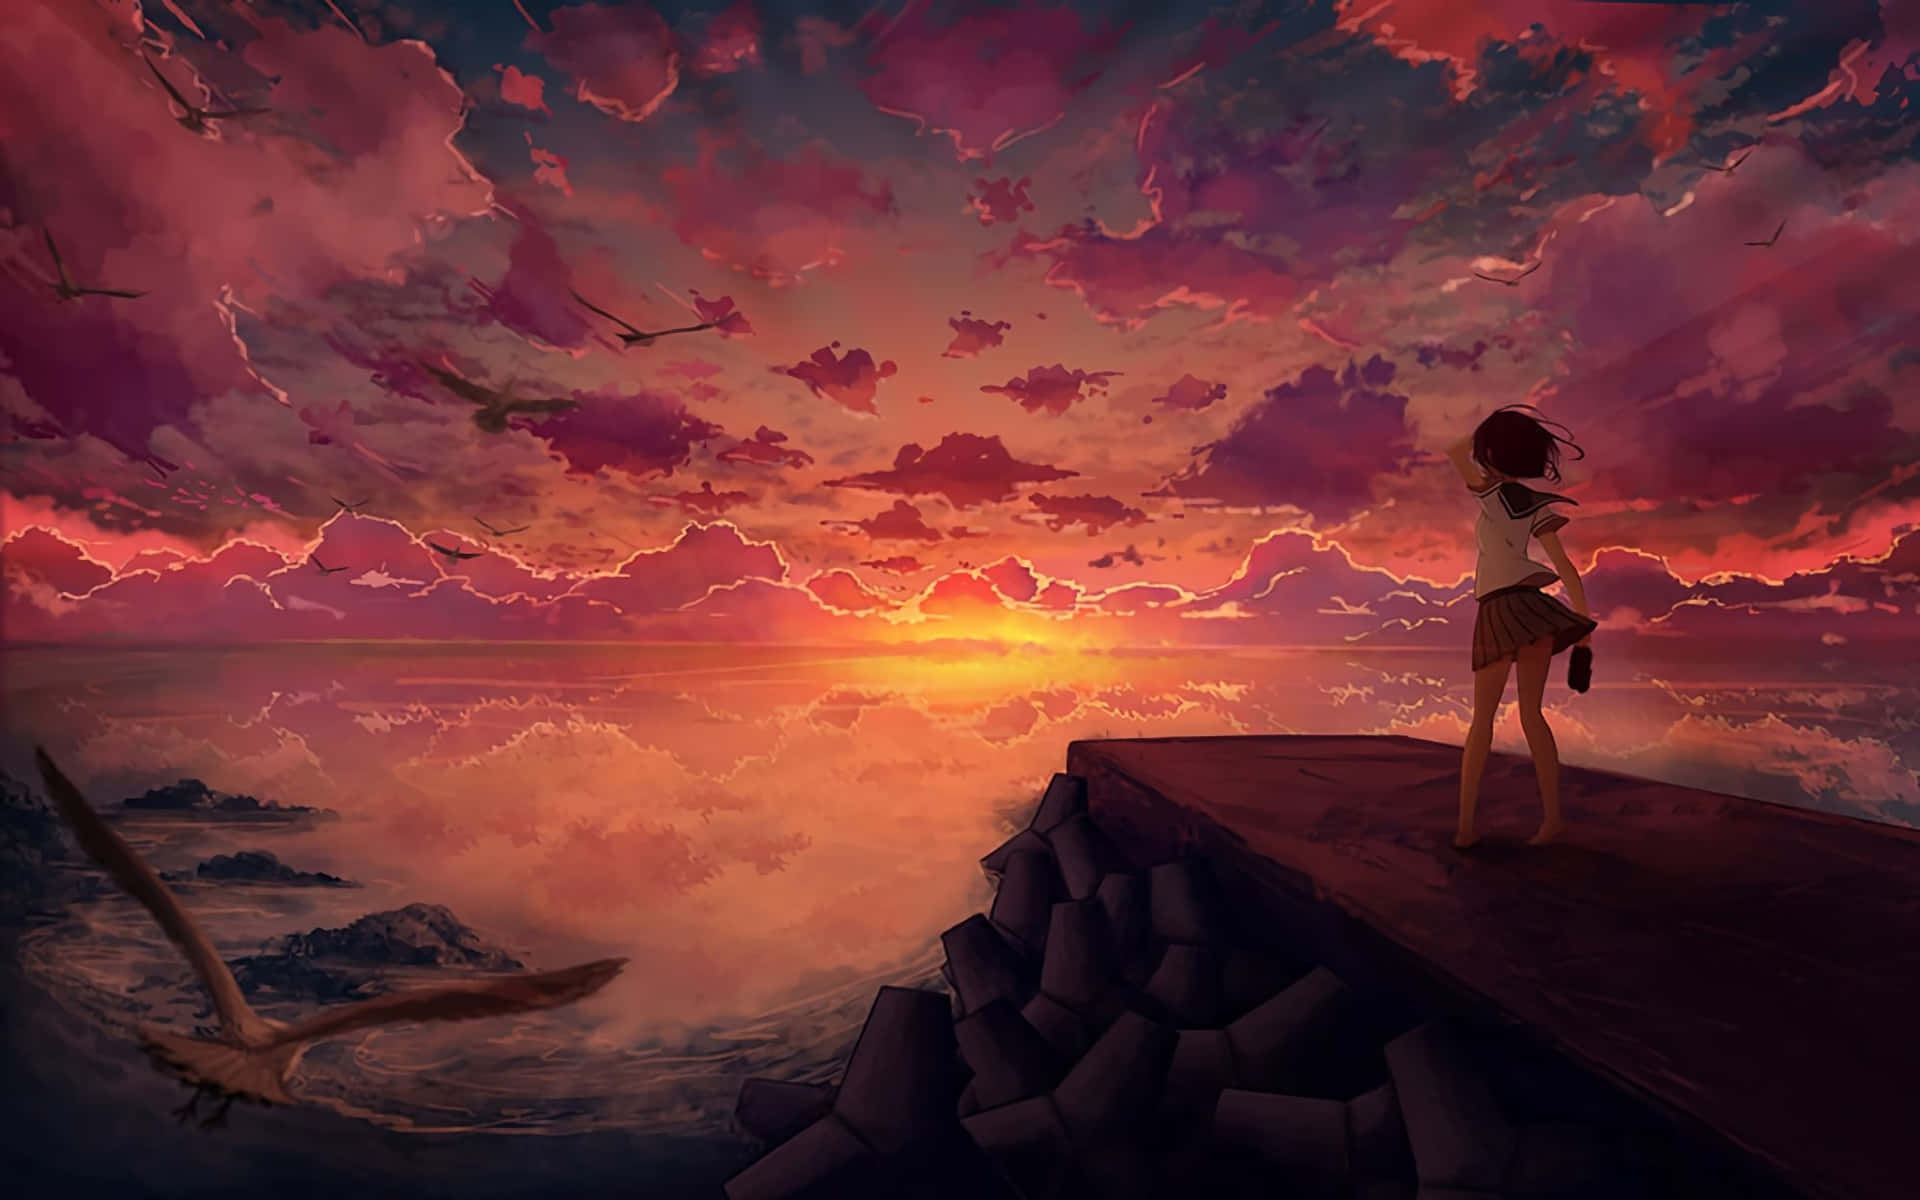 "Take in the breathtaking beauty of the anime sky!"